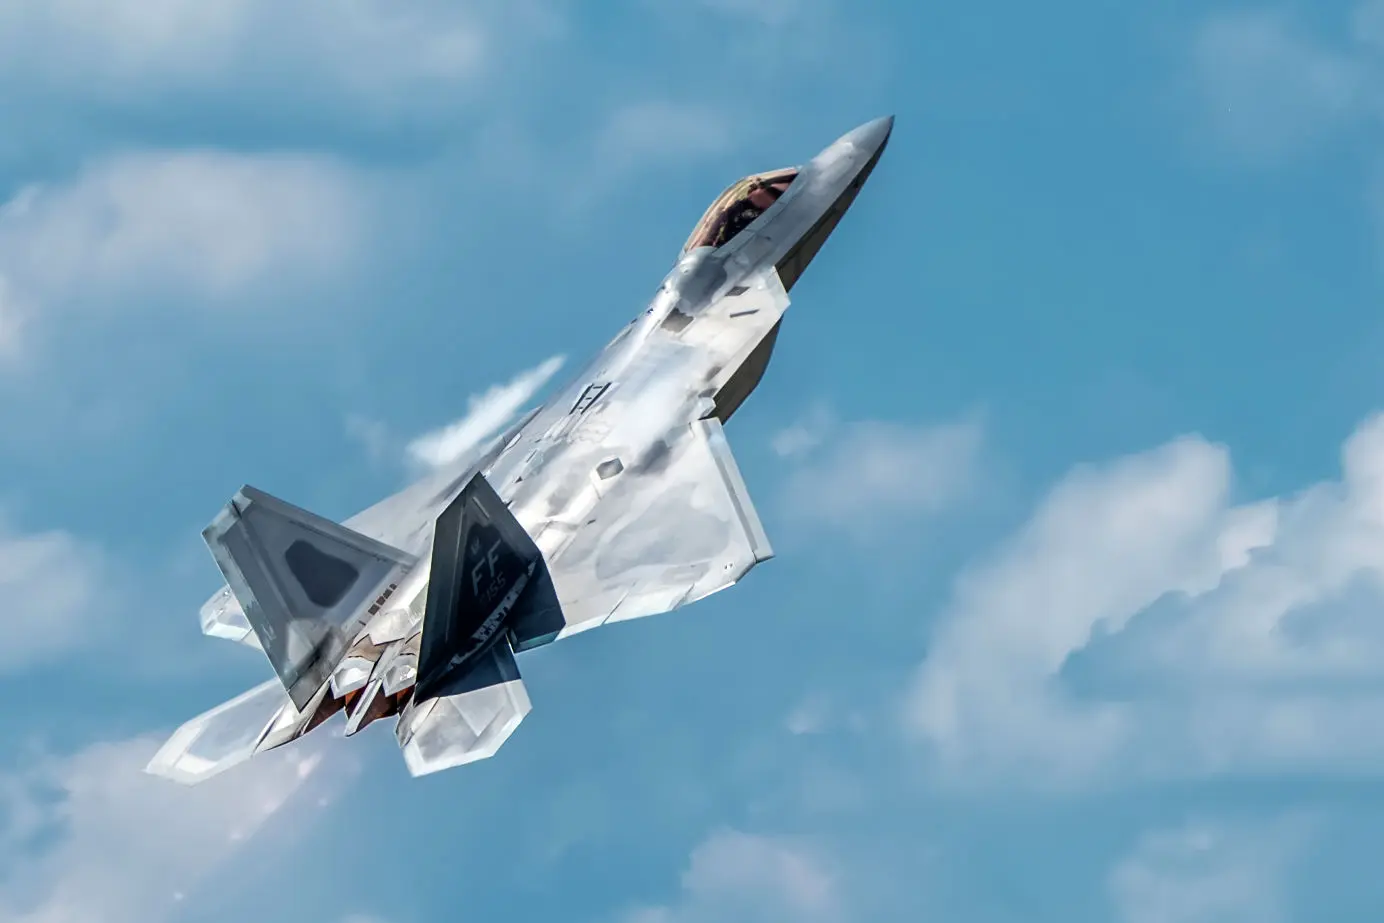 Does the US Navy Have the F-22 Raptor?